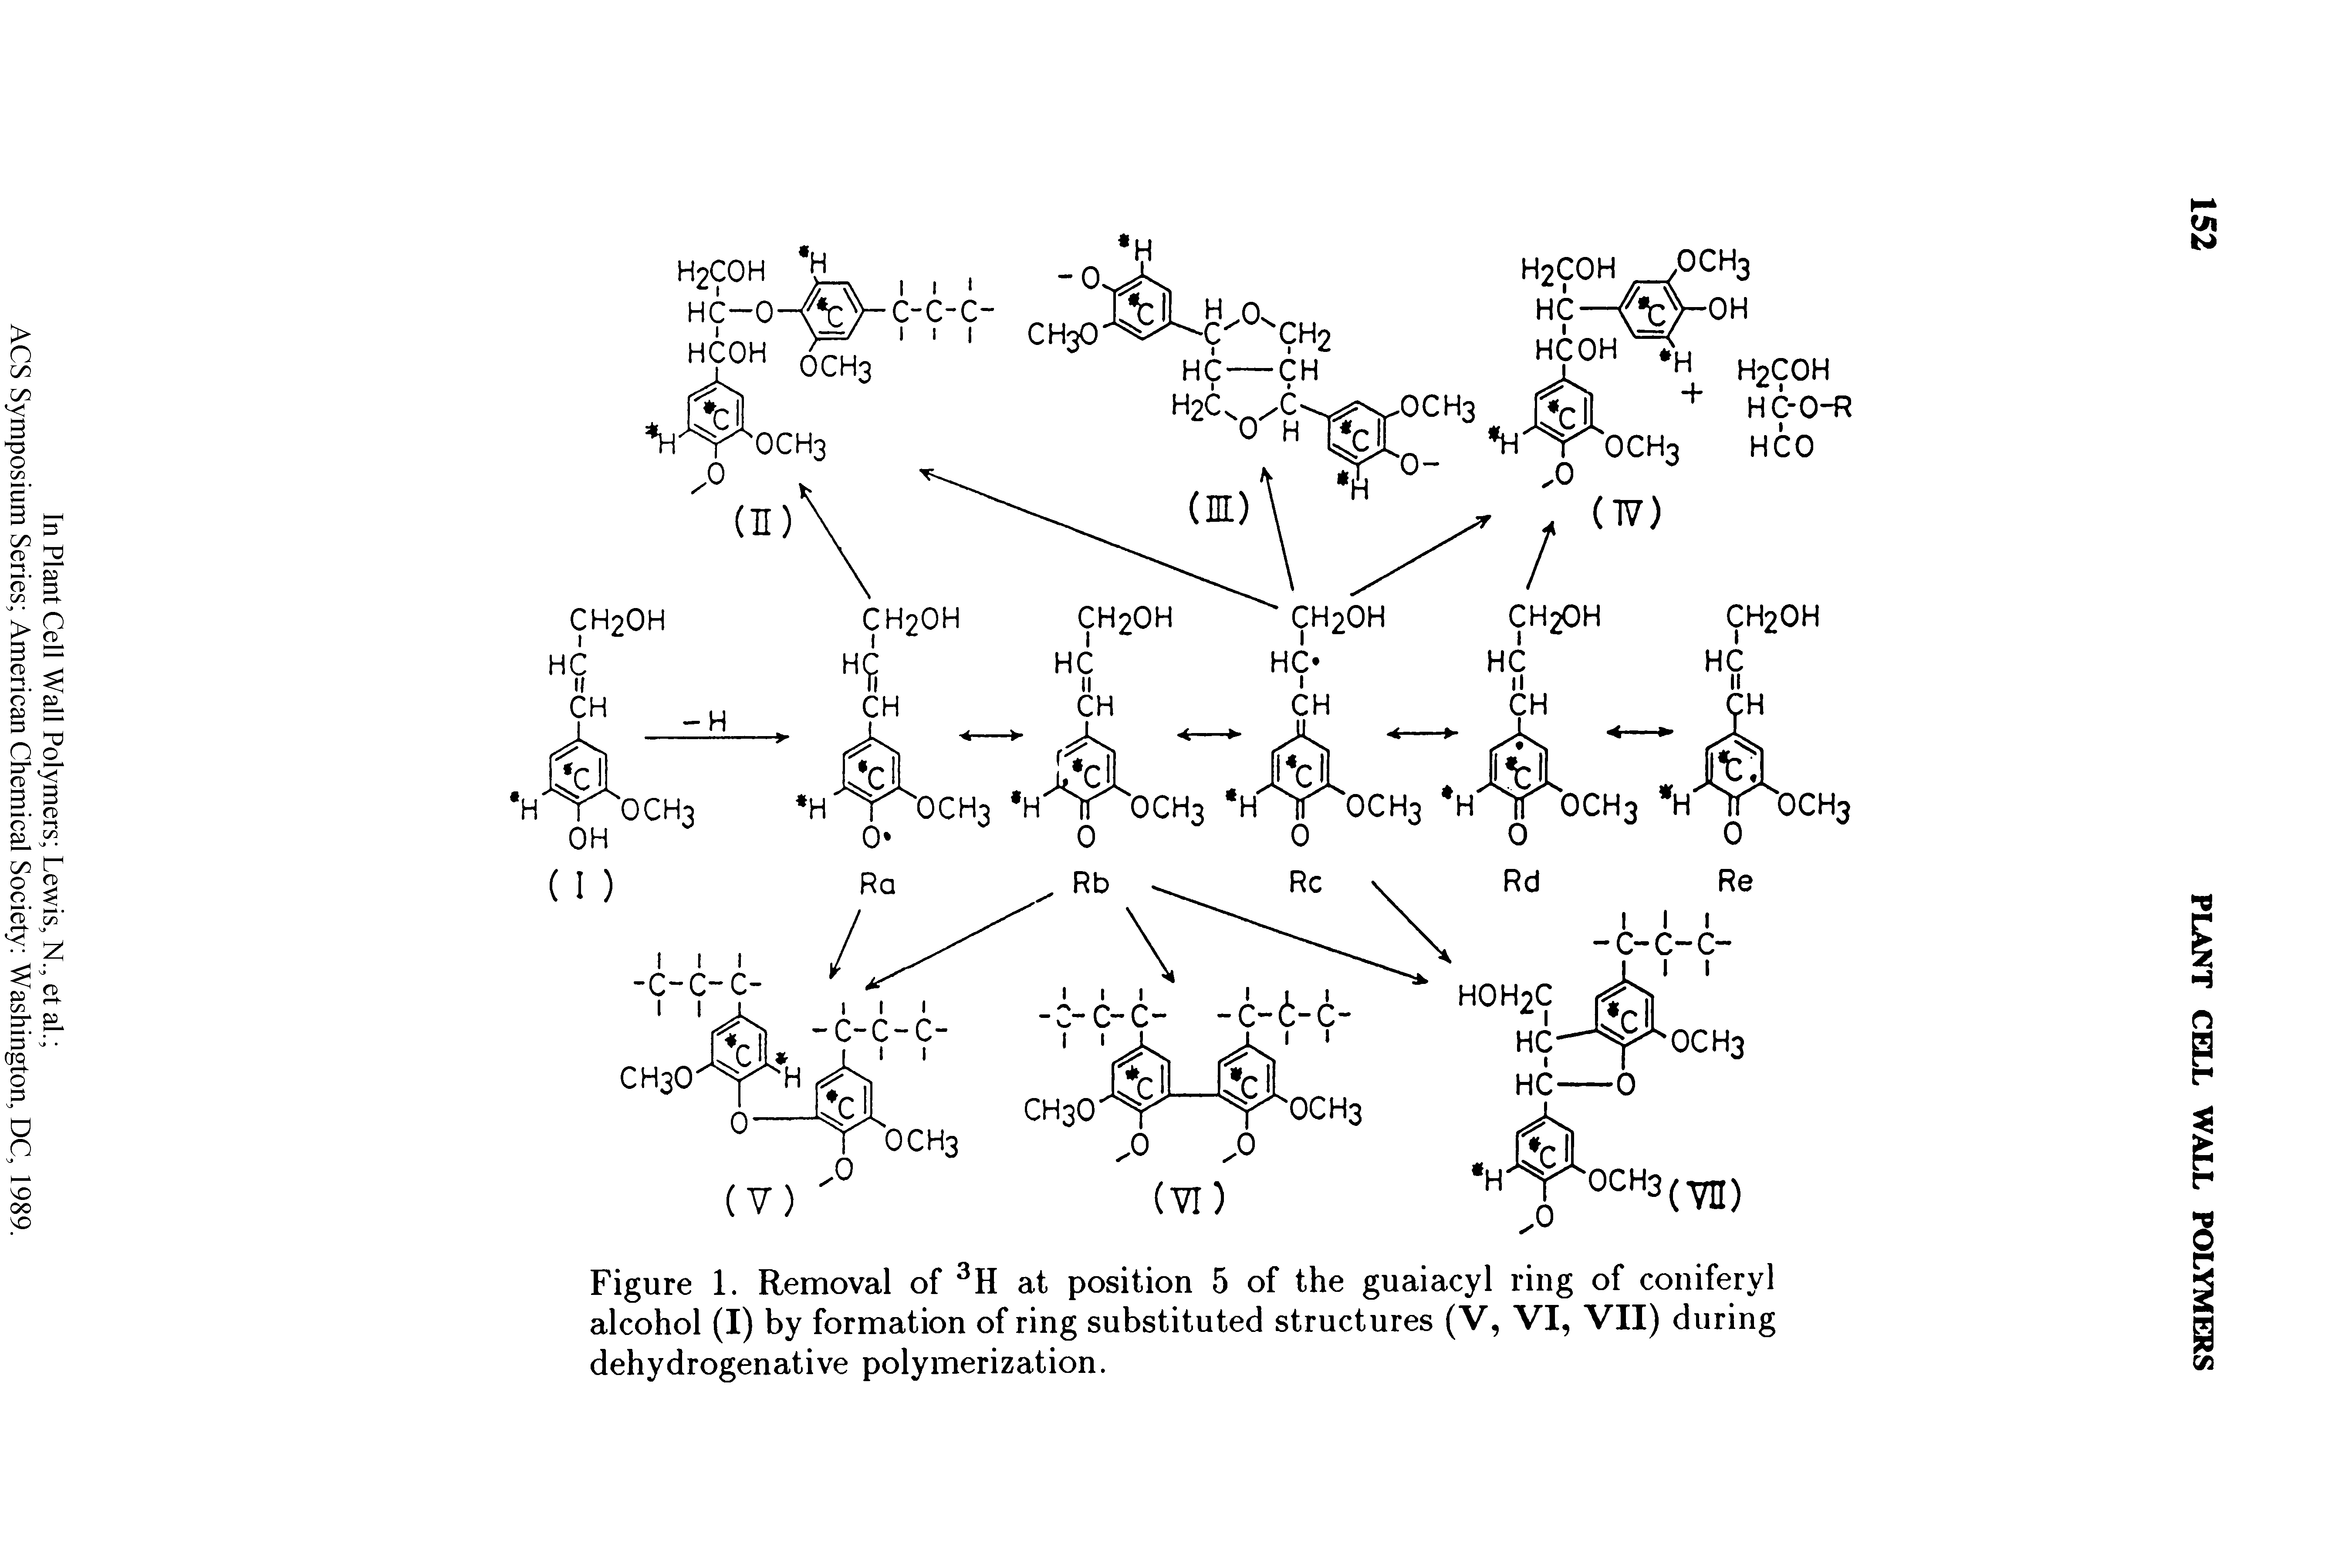 Figure 1. Removal of 3H at position 5 of the guaiacyl ring of coniferyl alcohol (I) by formation of ring substituted structures (V, VI, VII) during dehydrogenative polymerization.